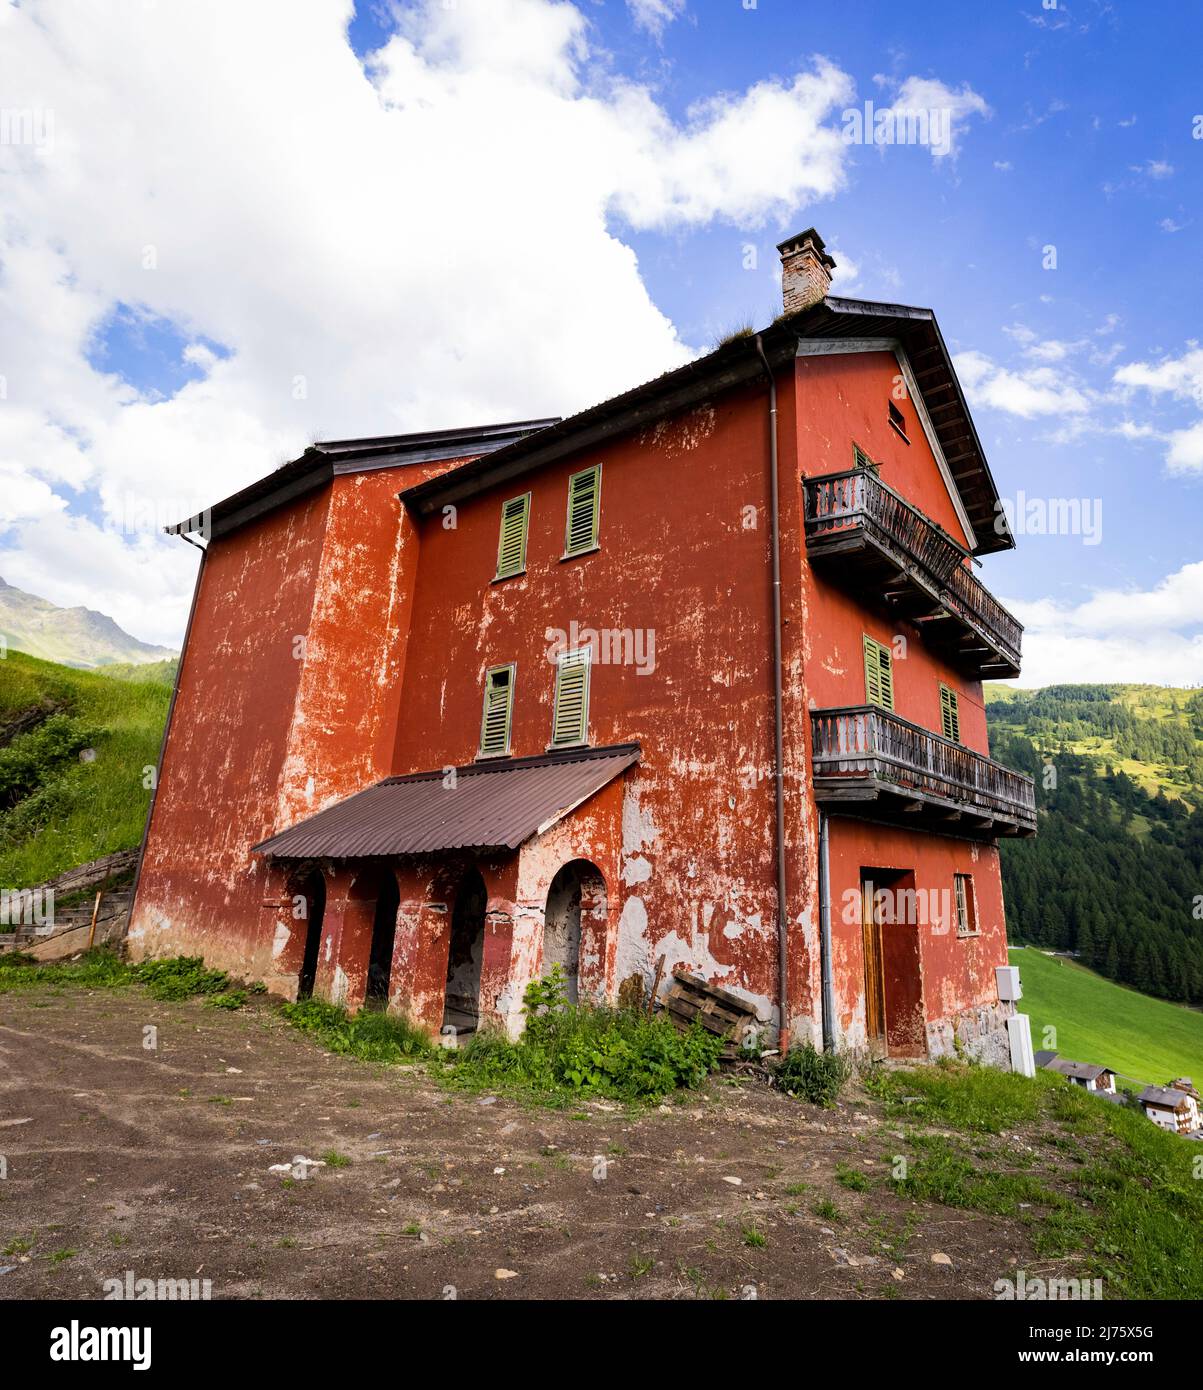 Old ruinous house in the South Tyrolean Alps in Italy, Stock Photo